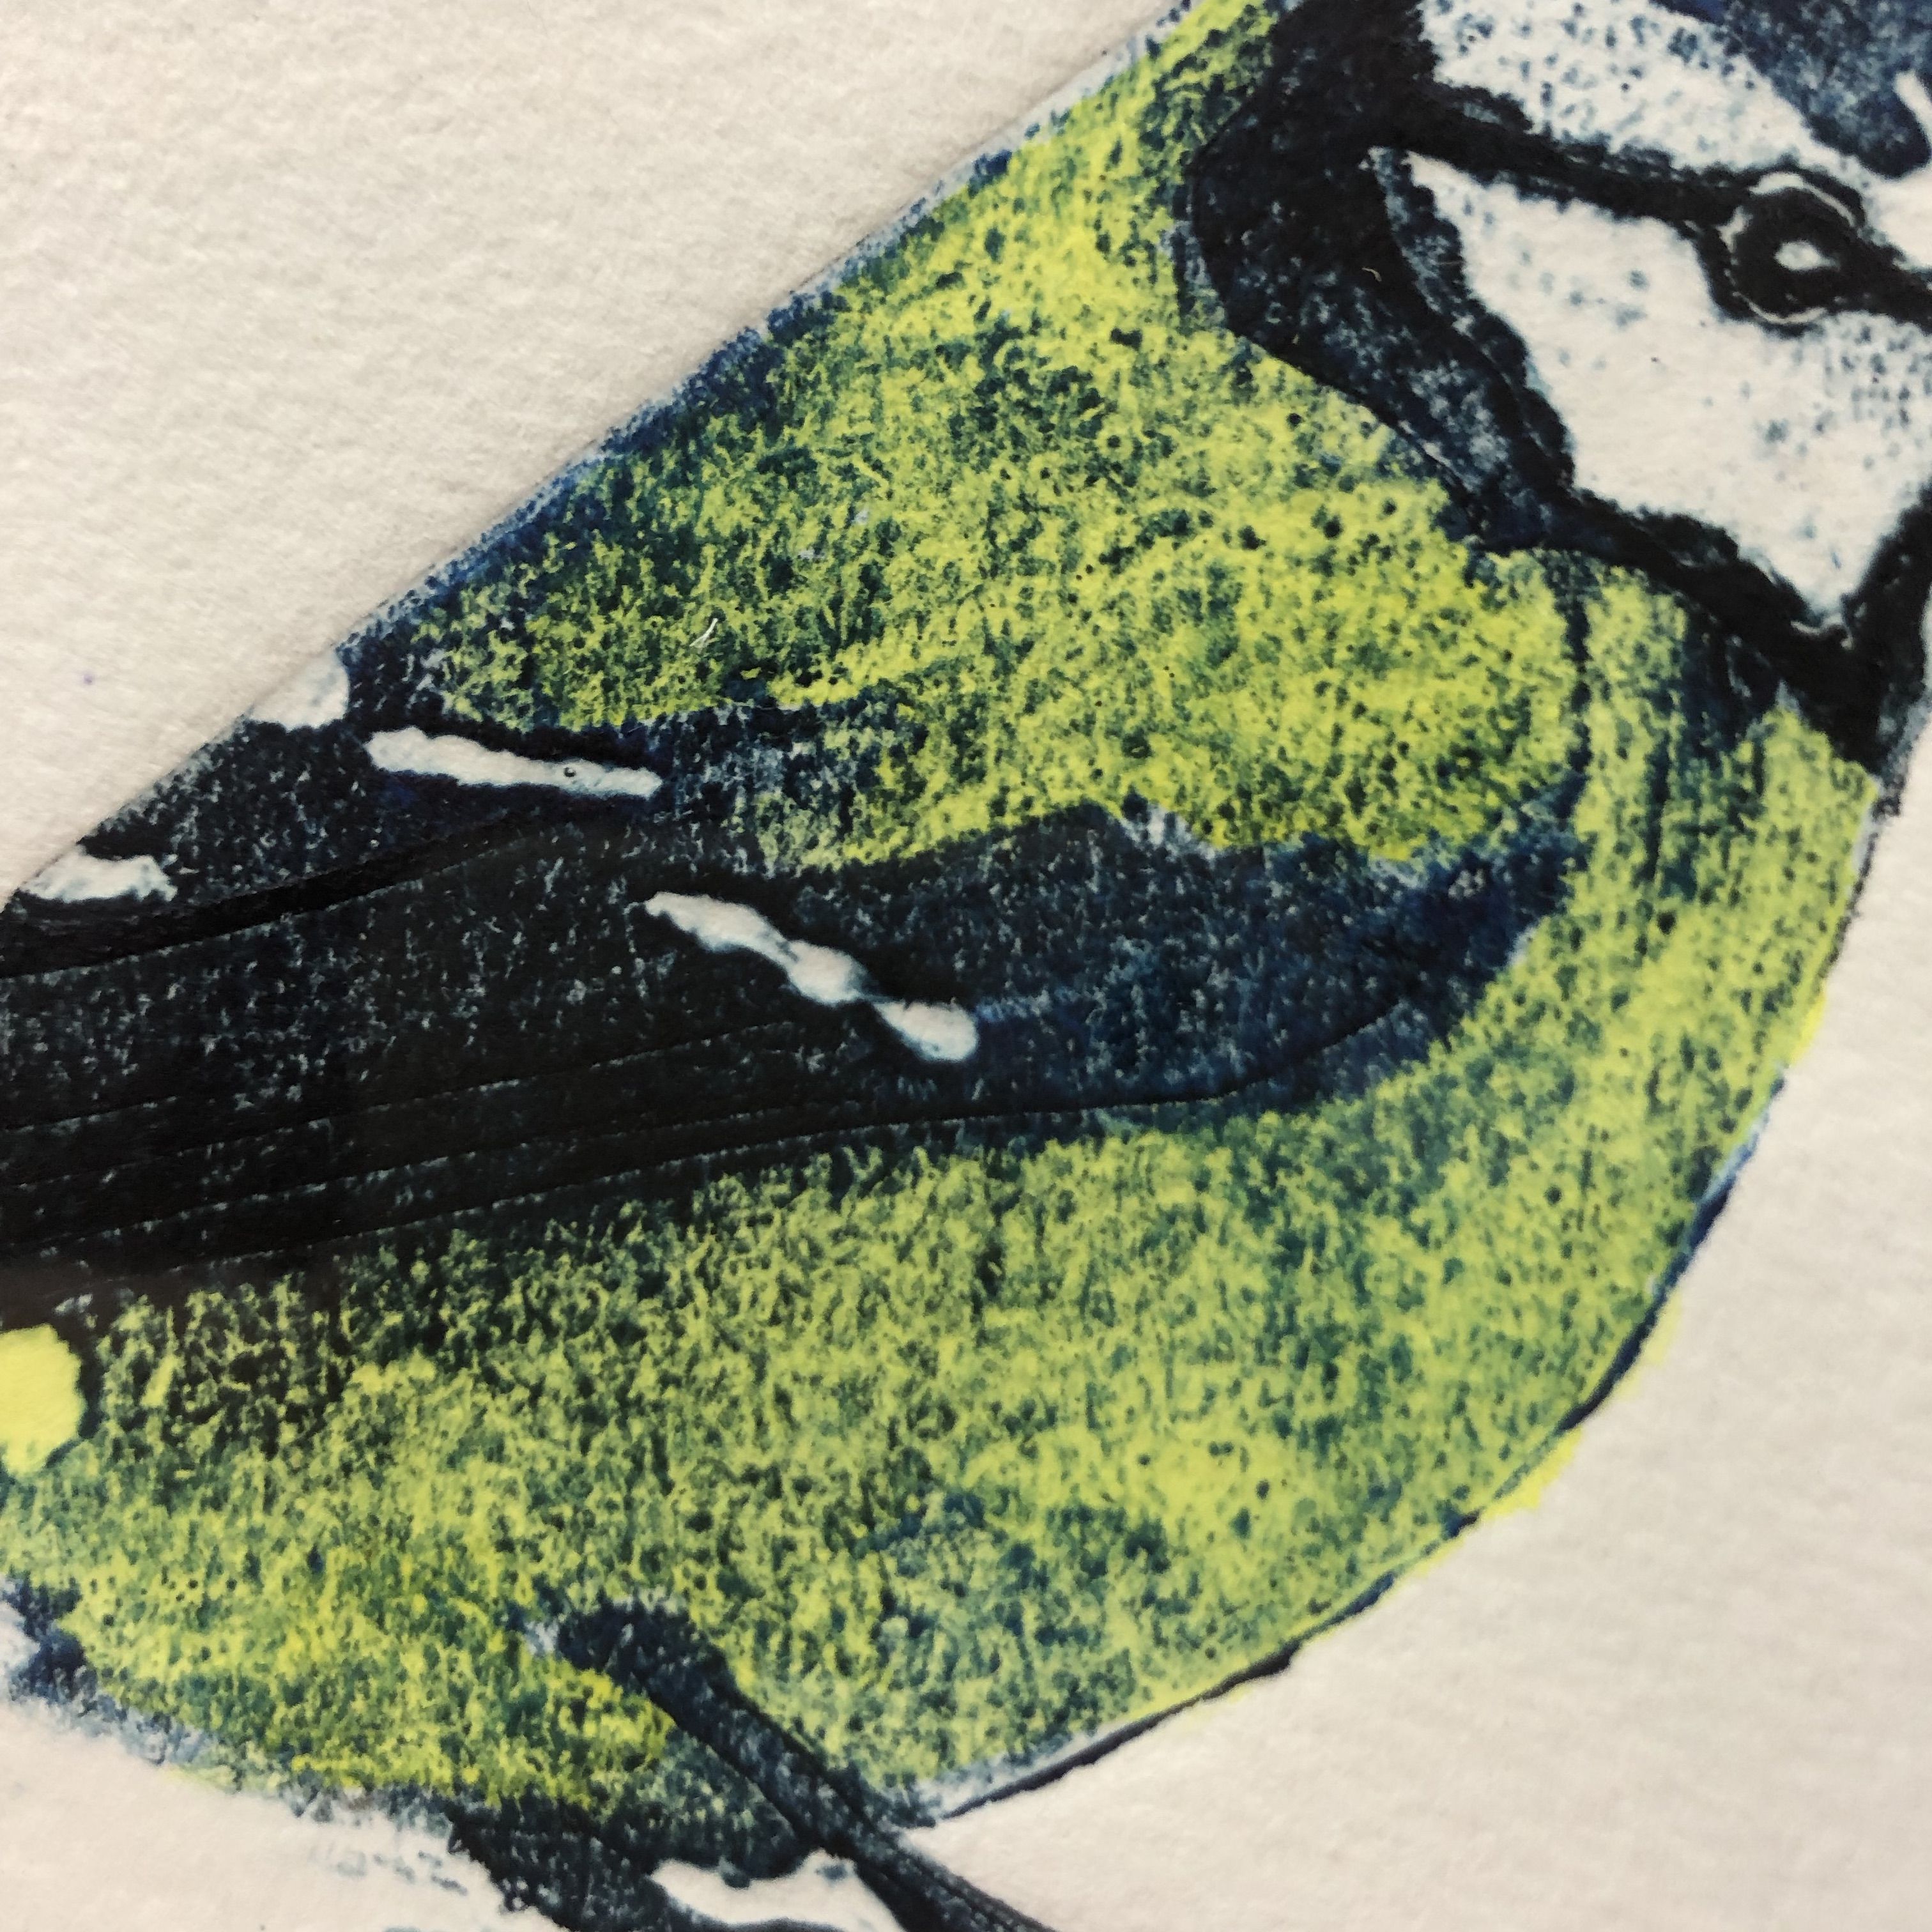 Blue Tit by sue brown - Secondary Image